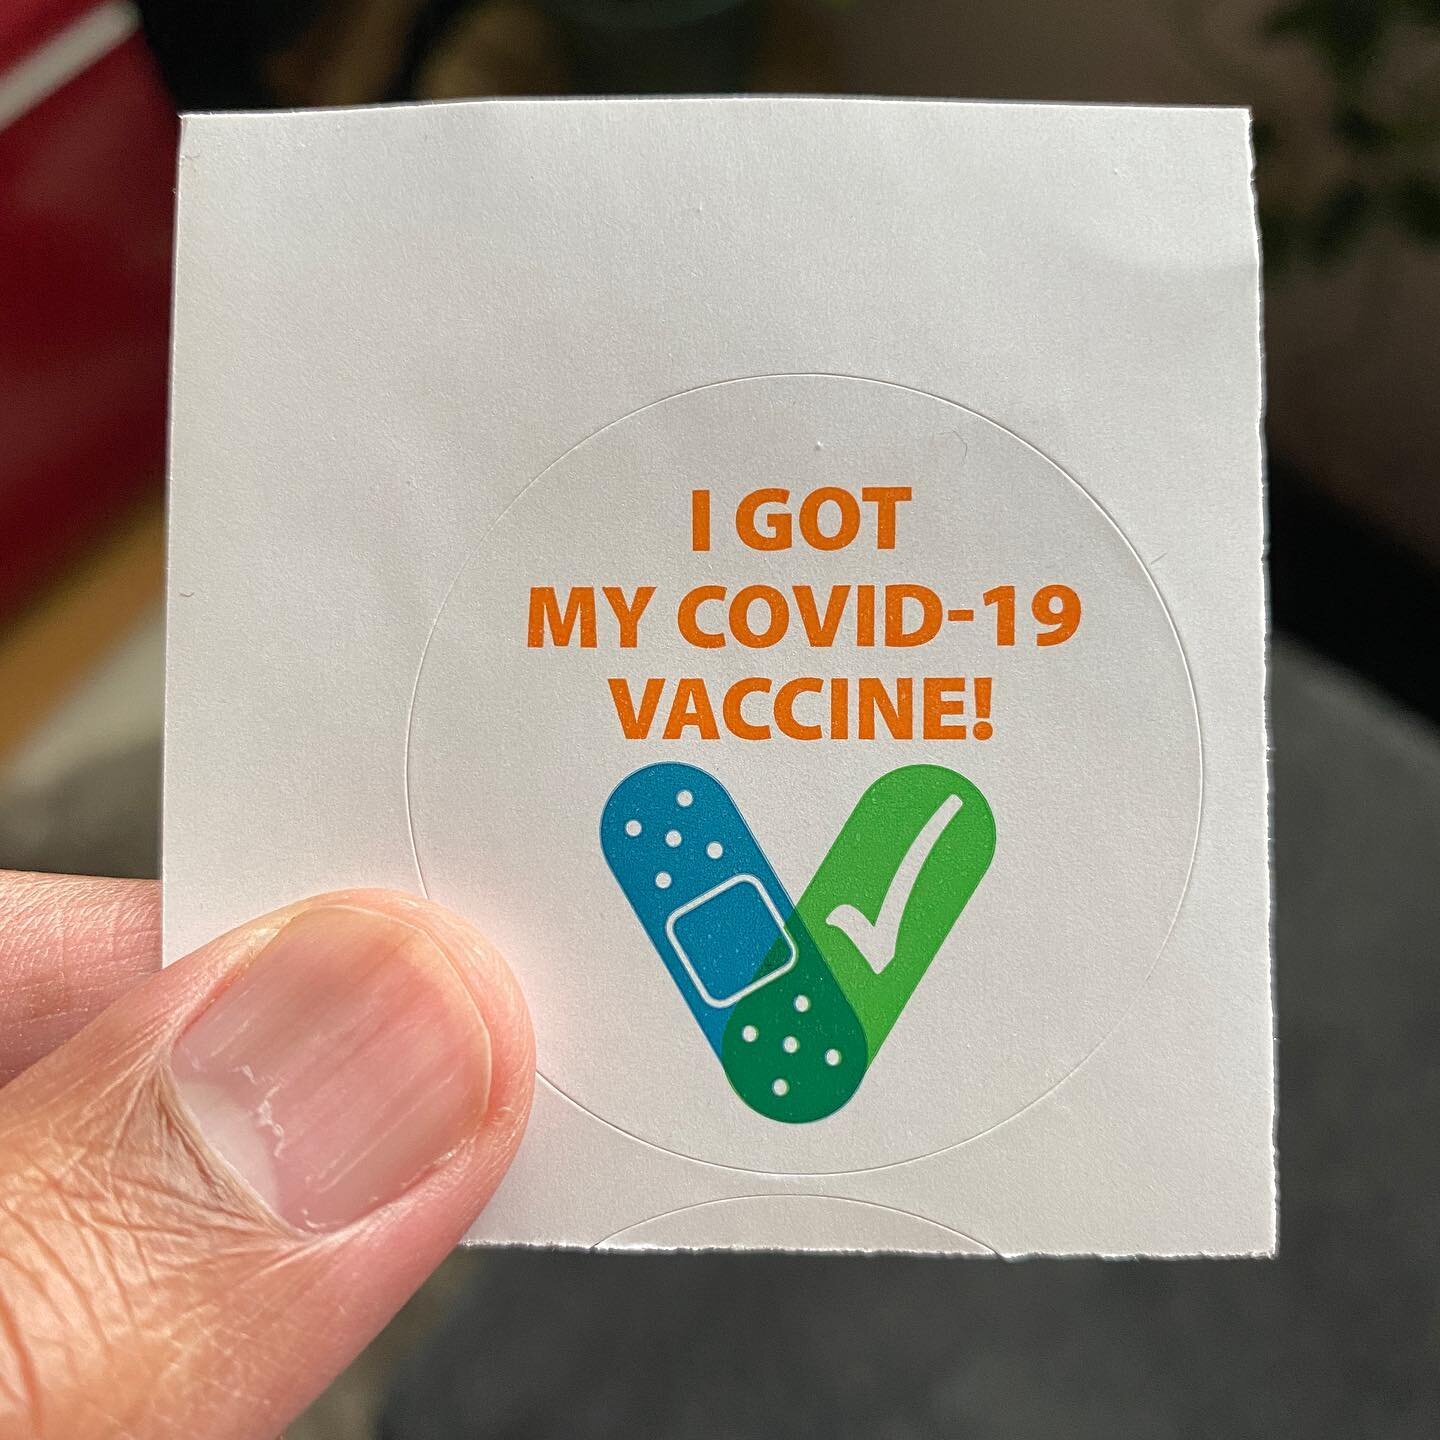 Got my second shot on Wednesday and forgot to post. Now just gotta wait 2 weeks for my new superpowers to kick in!! Hoping for the ability to grow a full mountain man beard instead of this glorified teenage chin strap #getthedamnshot #vaccinationdone